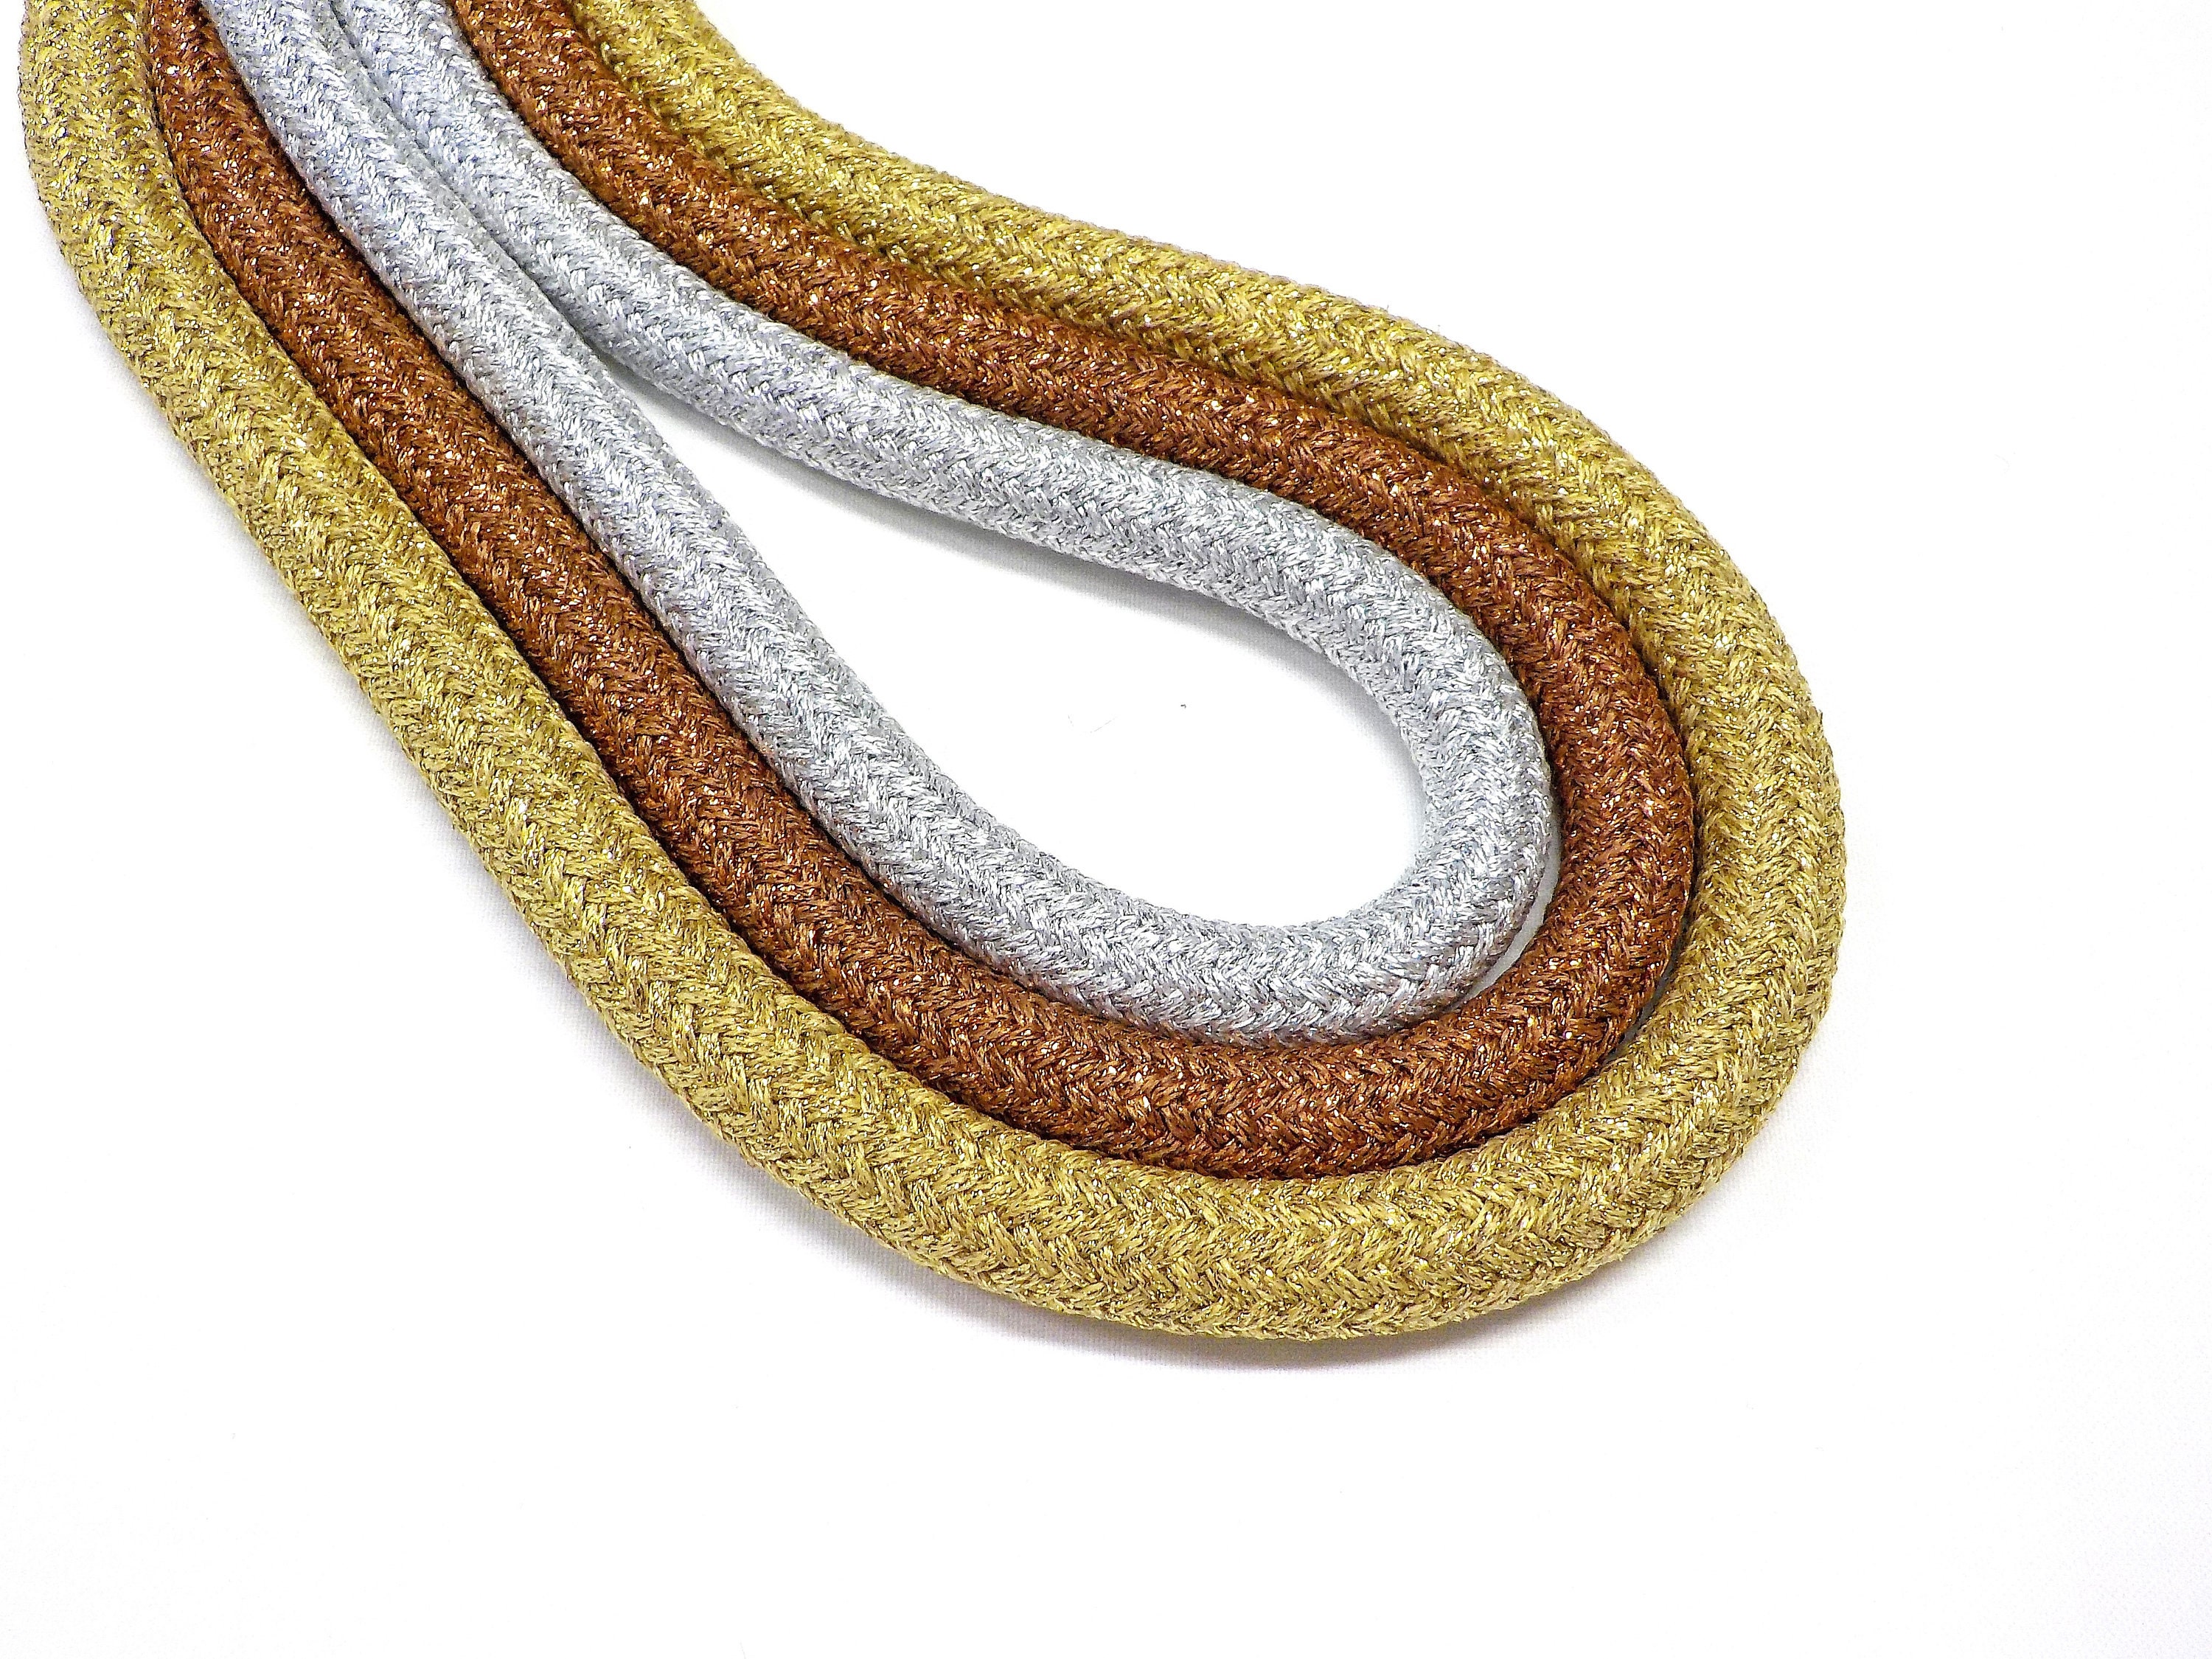 Buy Braided Trim Rope Cord, Semisoft Climbing Cord, Metallic Copper, Gold,  Silver Paracord Round Cord 9-10mm, Ideal for Dog Leash 1 Yard/piece Online  in India 